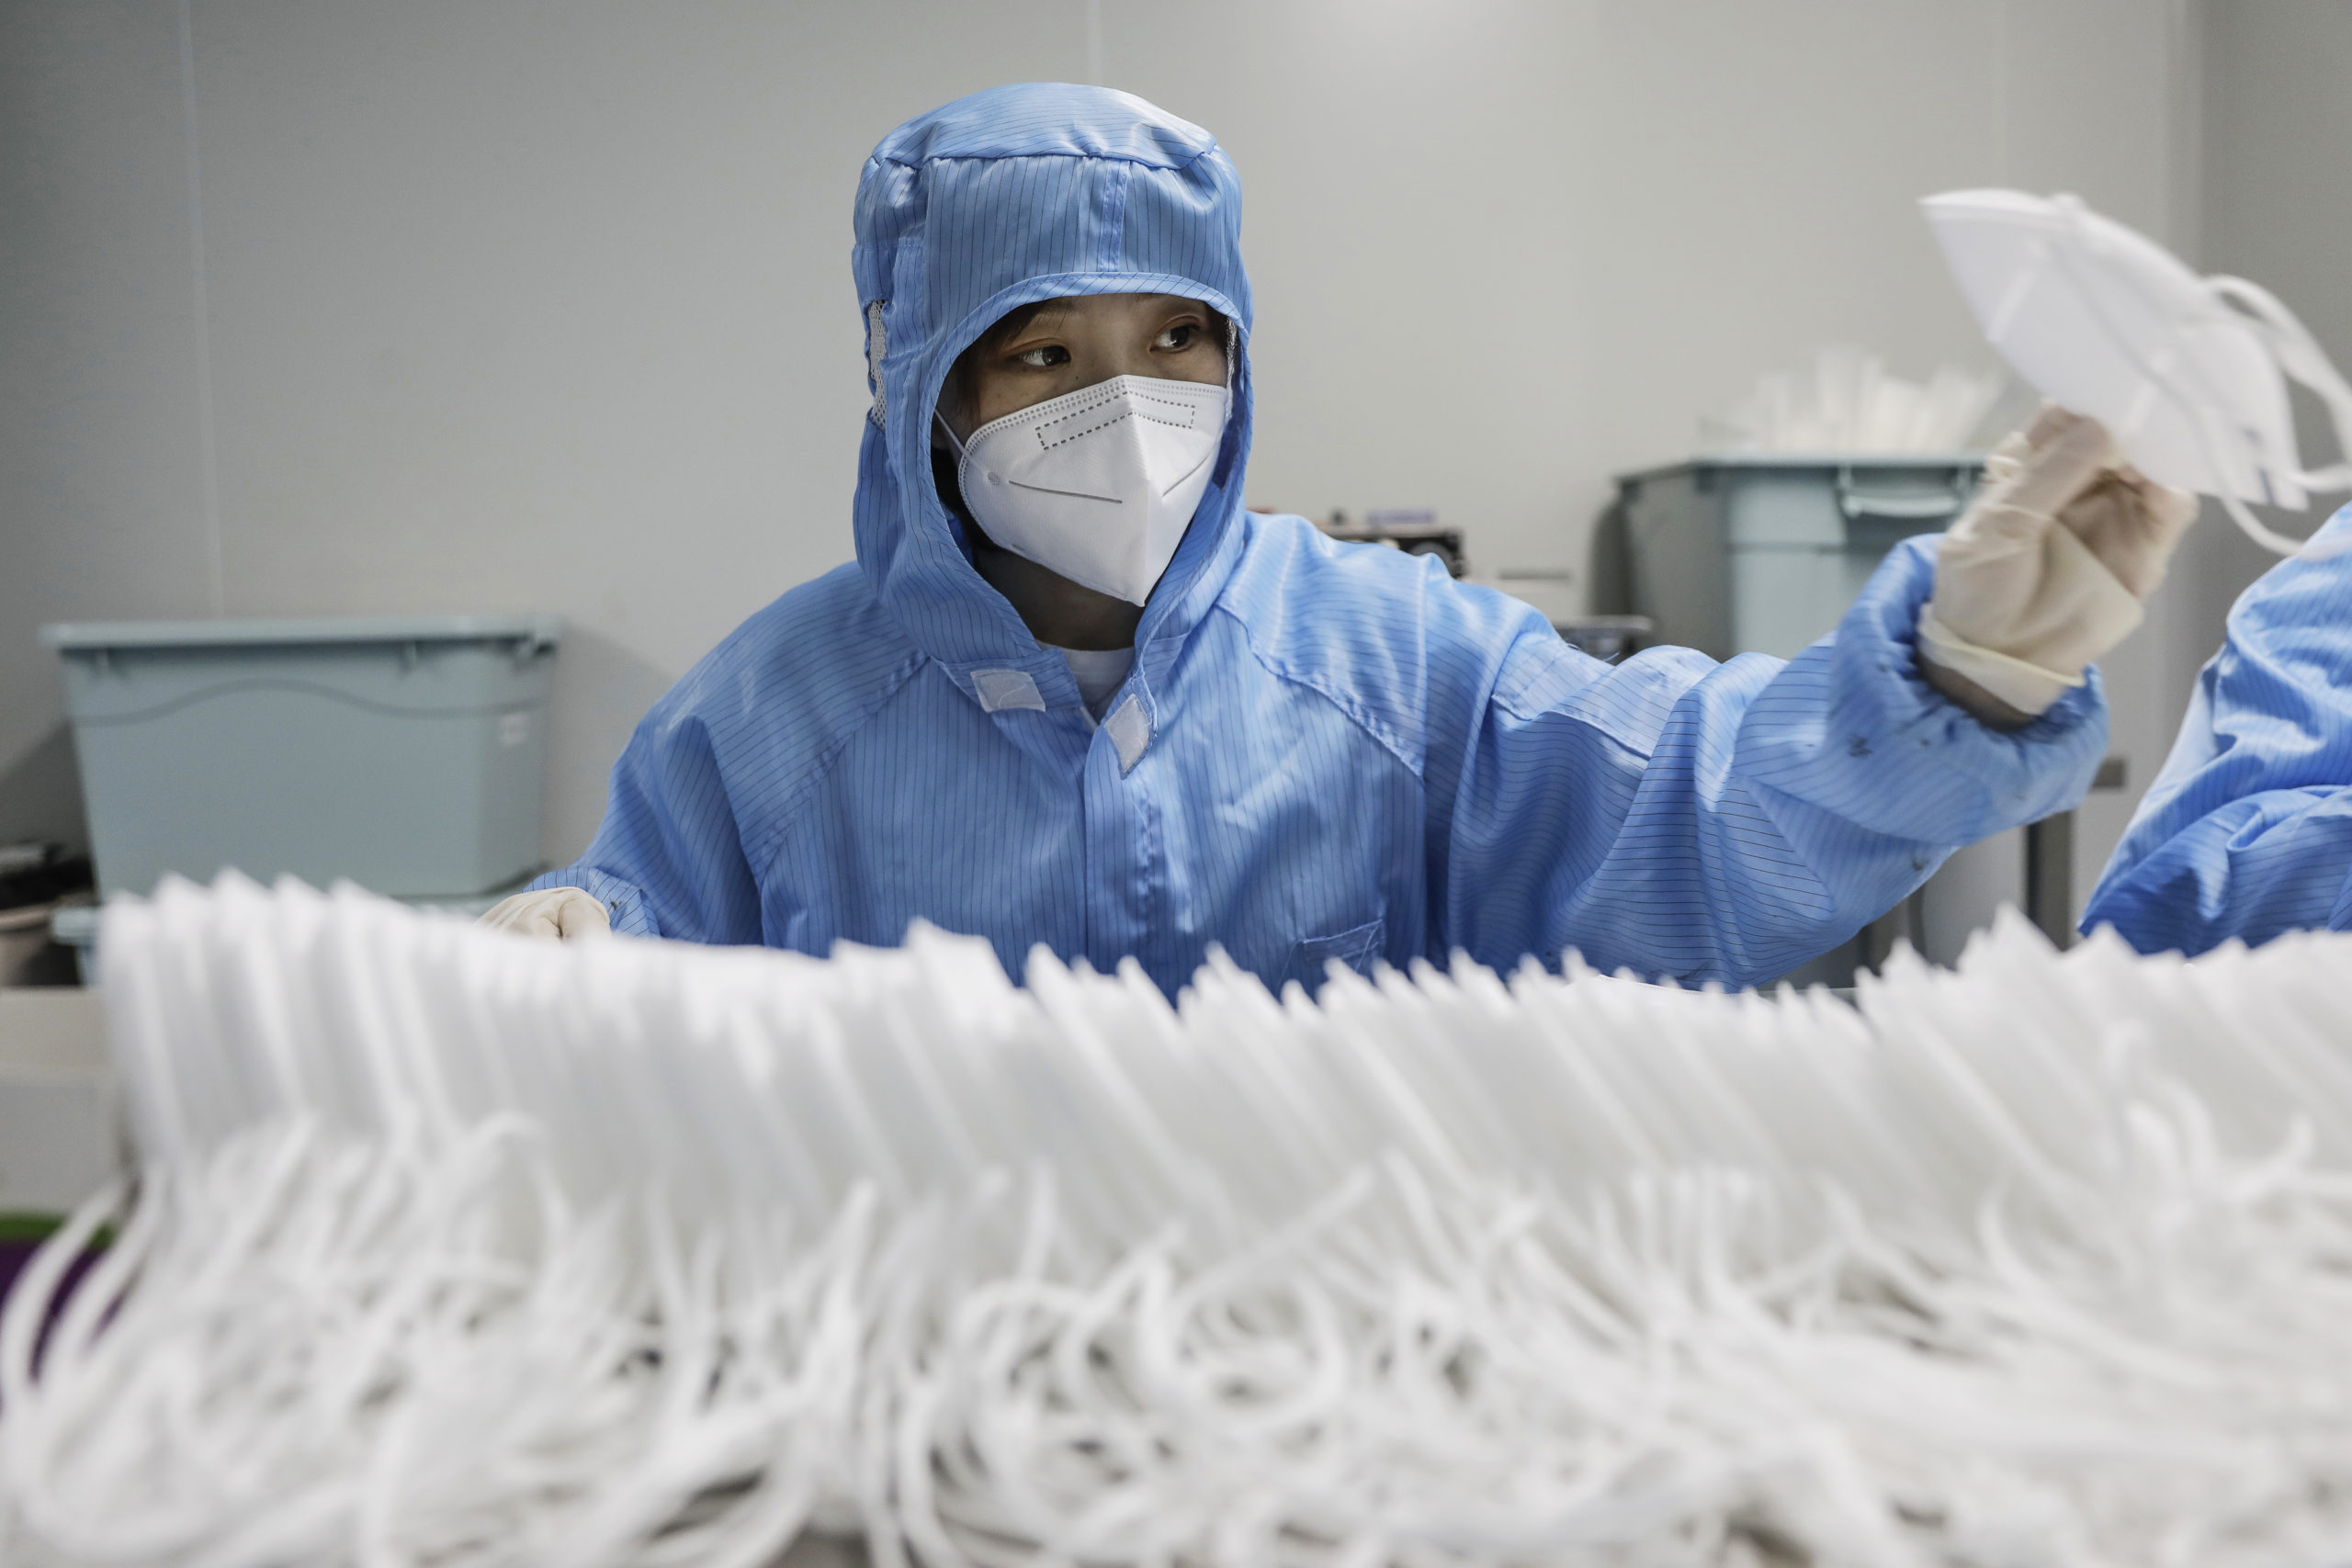 A worker wearing a protective suit and a face mask produces masks at a factory in China